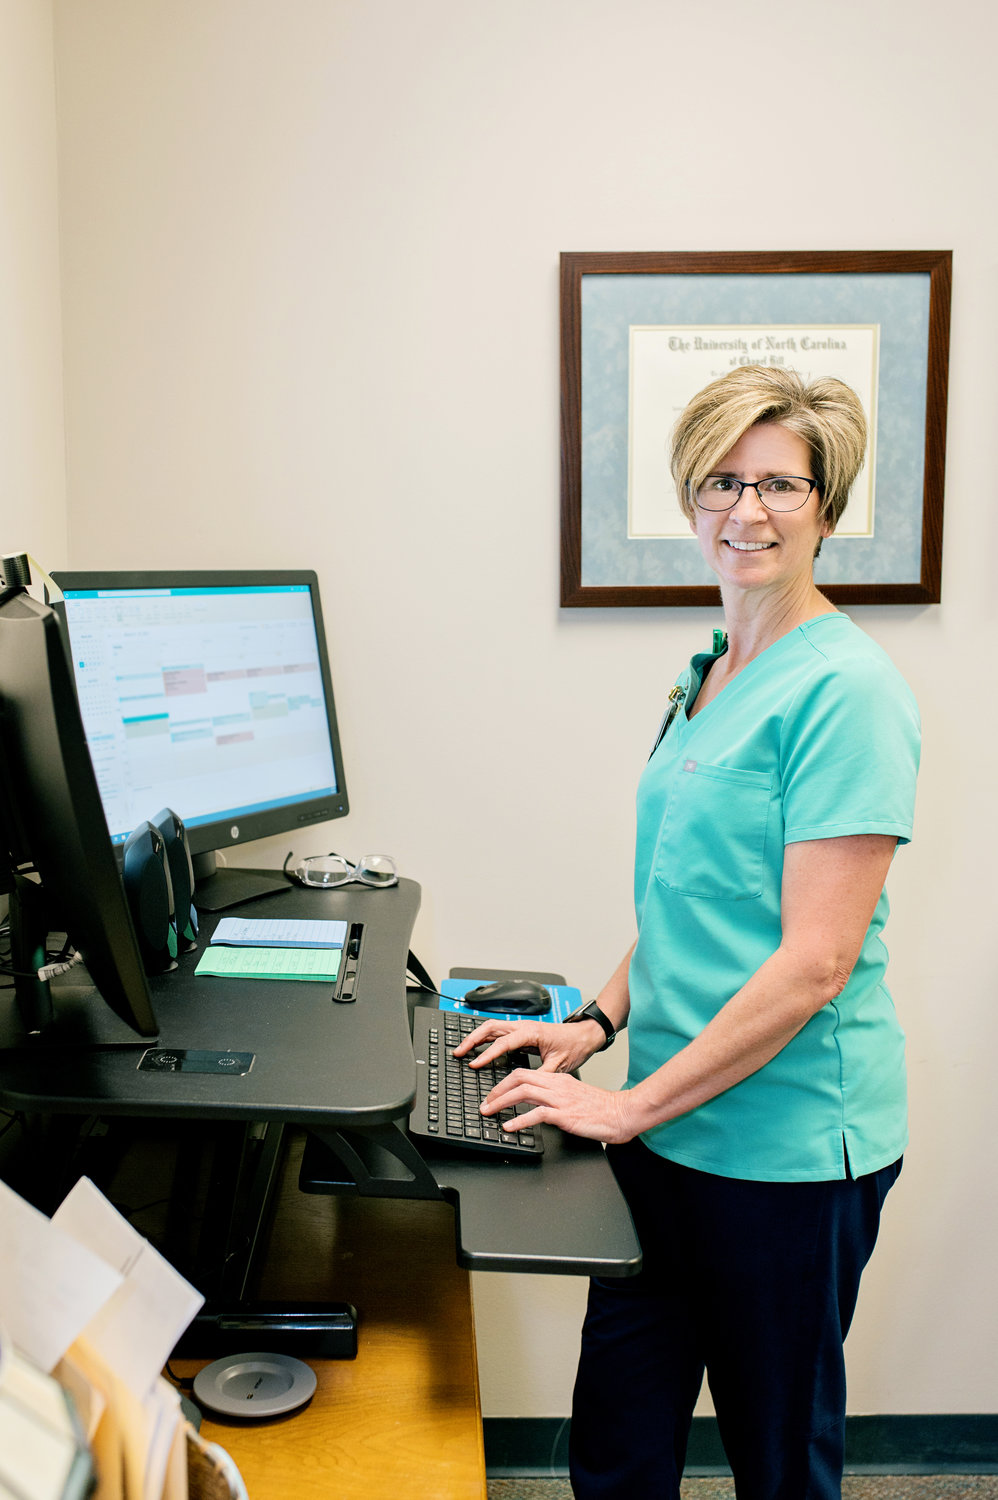 Melissa Wisneski, director of rehabilitation therapy services at Cape Fear Valley, says having a nearby Rock Steady program will be important for local Parkinson’s patients.